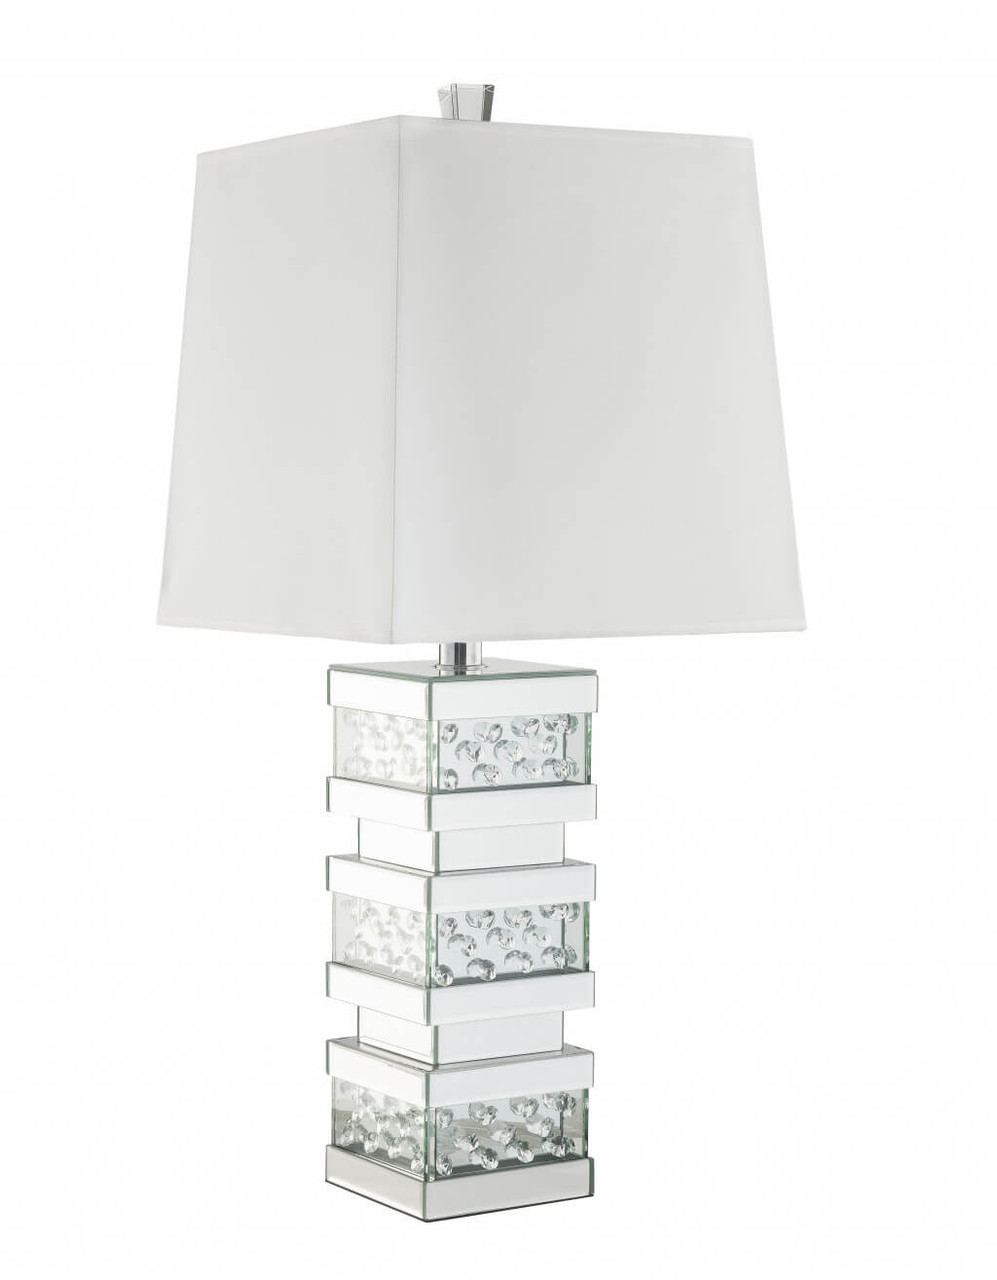 31" Mirrored Glass Faux Crystal Chunky Geo Table Lamp With White Square Shade - Chicken Pieces